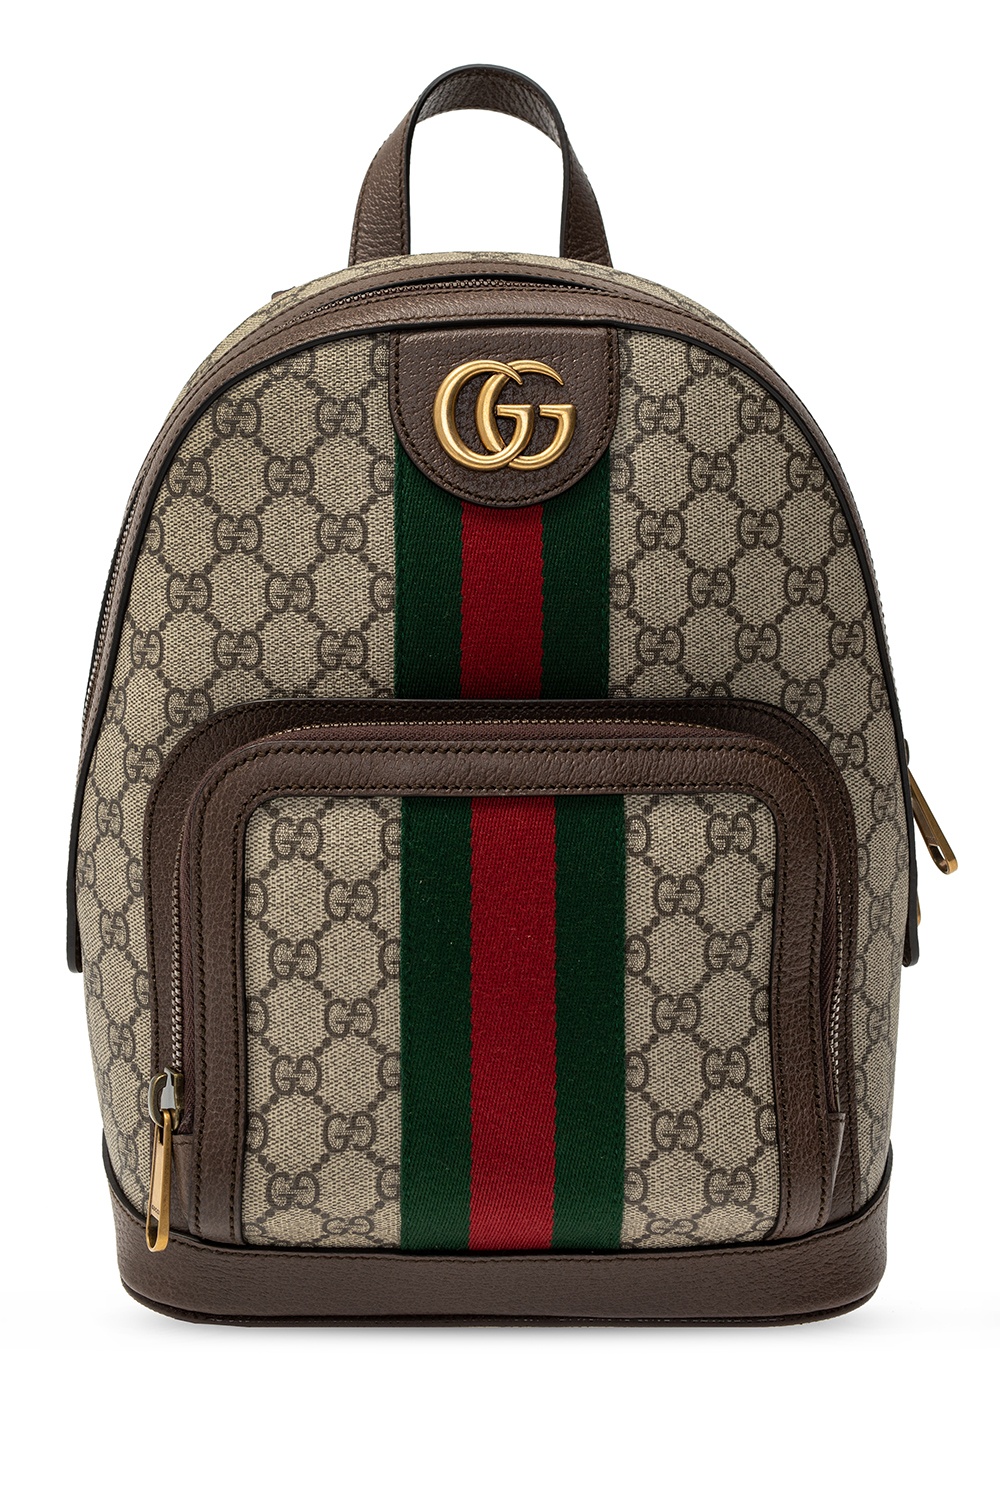 BALO UNISEX GUCCI OPHIDIA GG SMALL BACKPACK 13